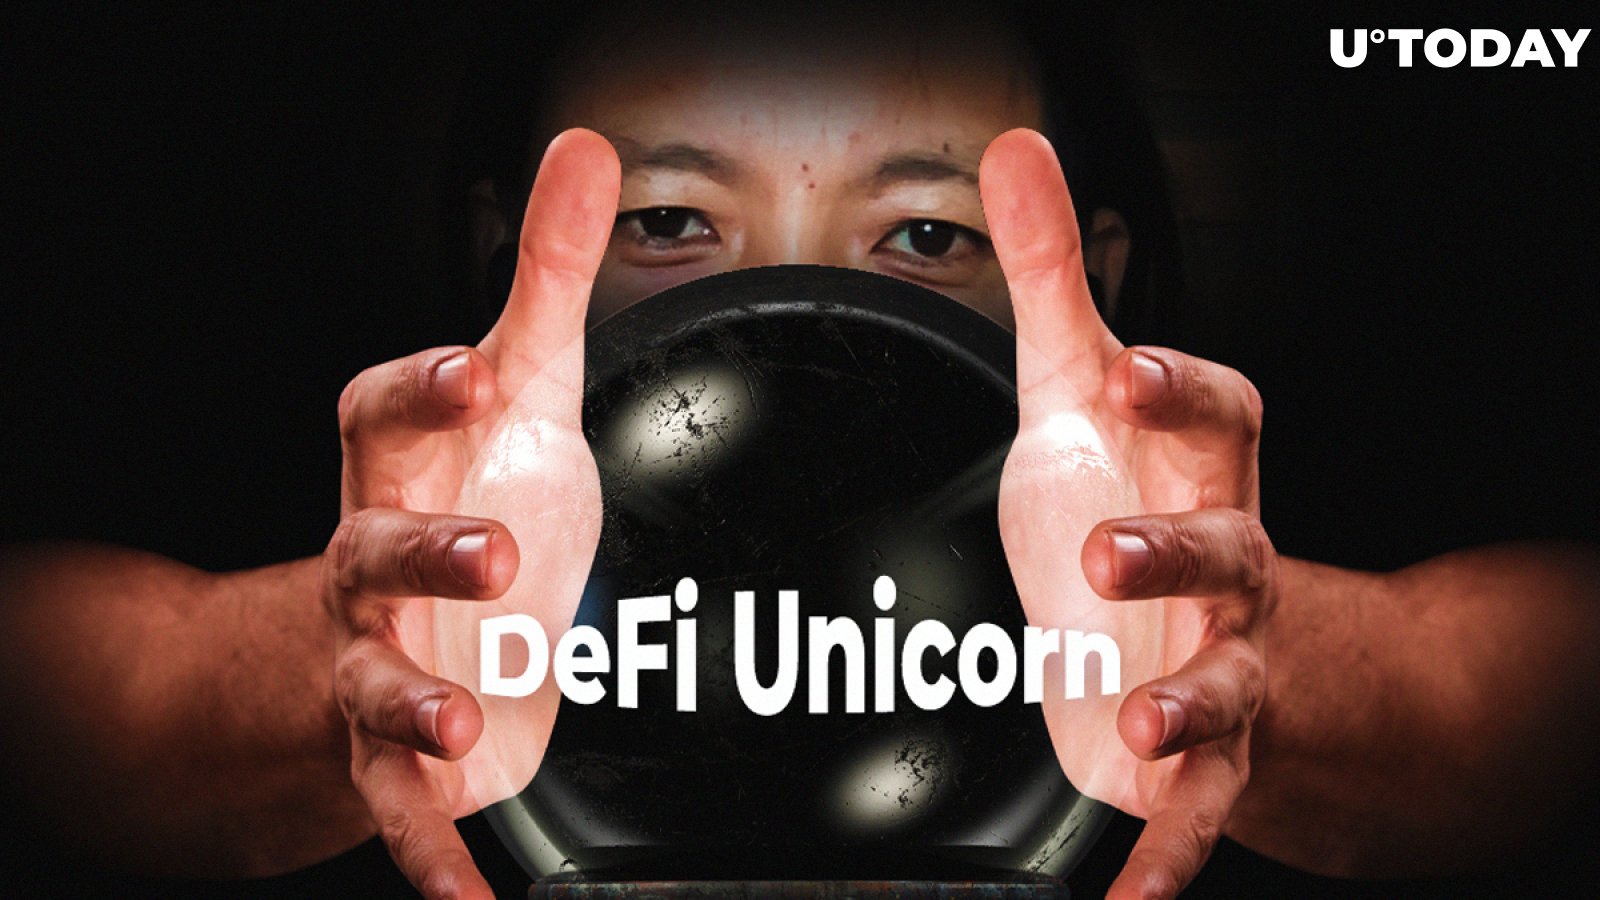 Willy Woo Predicted New 'DeFi Unicorn': Details